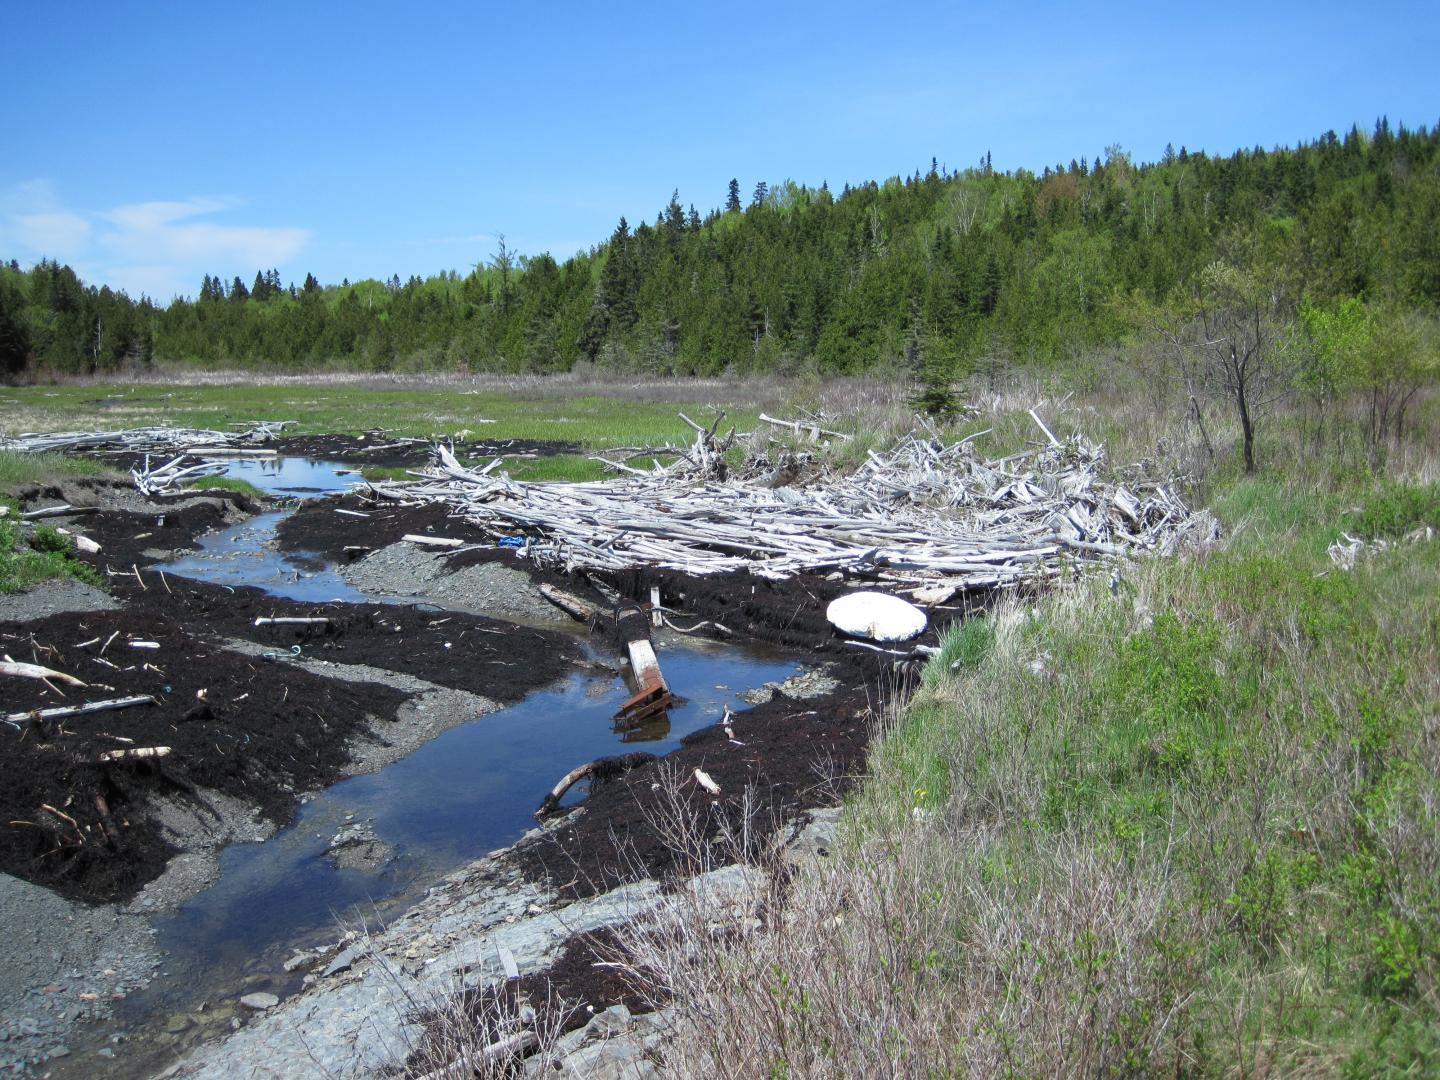 A Driftwood Depository at Hartley Cove, Canada